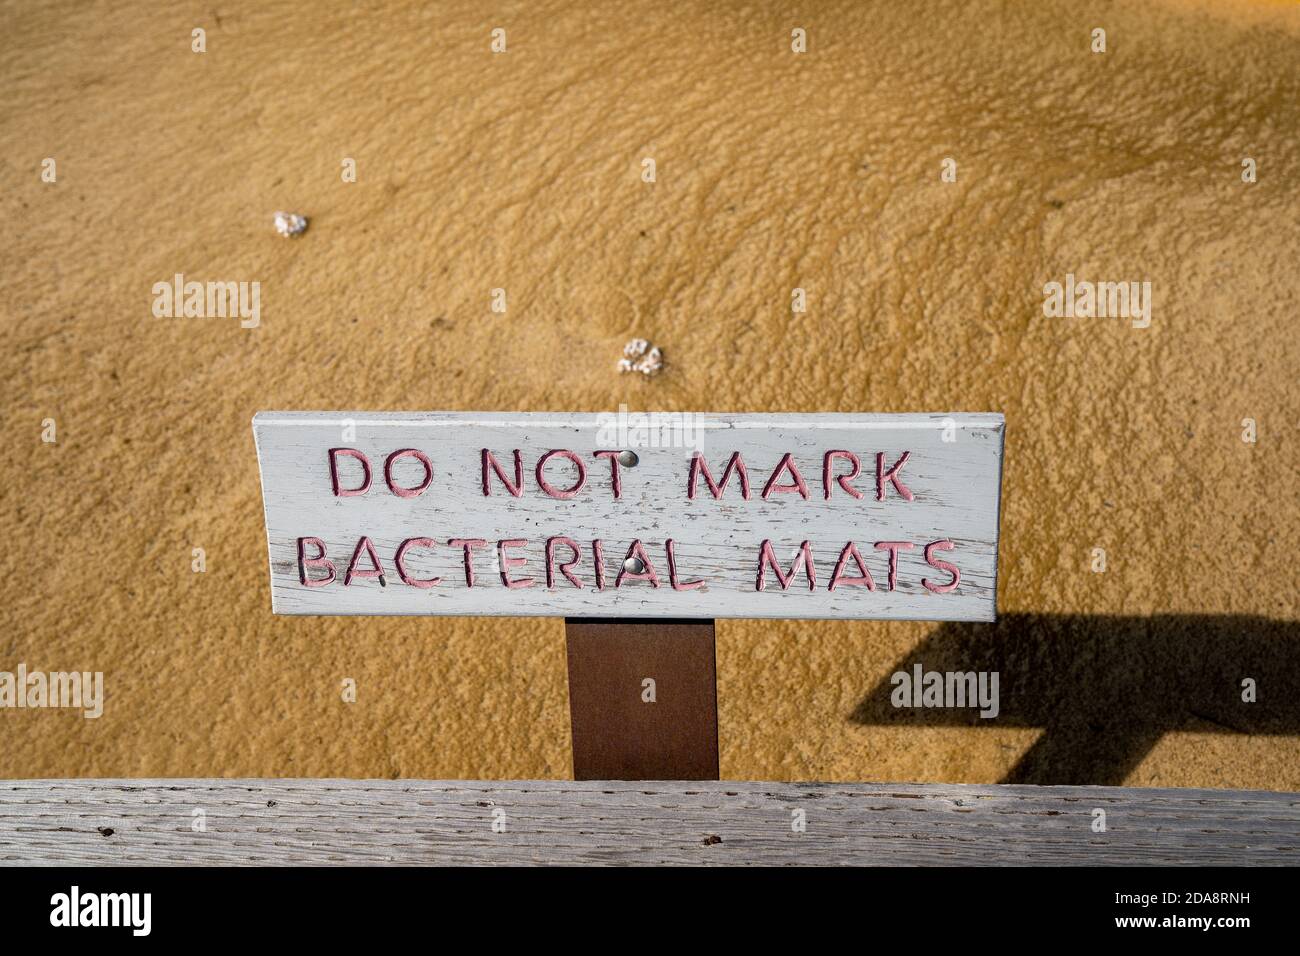 Sign - do not mark bacterial mats in Yellowstone National Park reminds tourists not to deface the enviornment Stock Photo